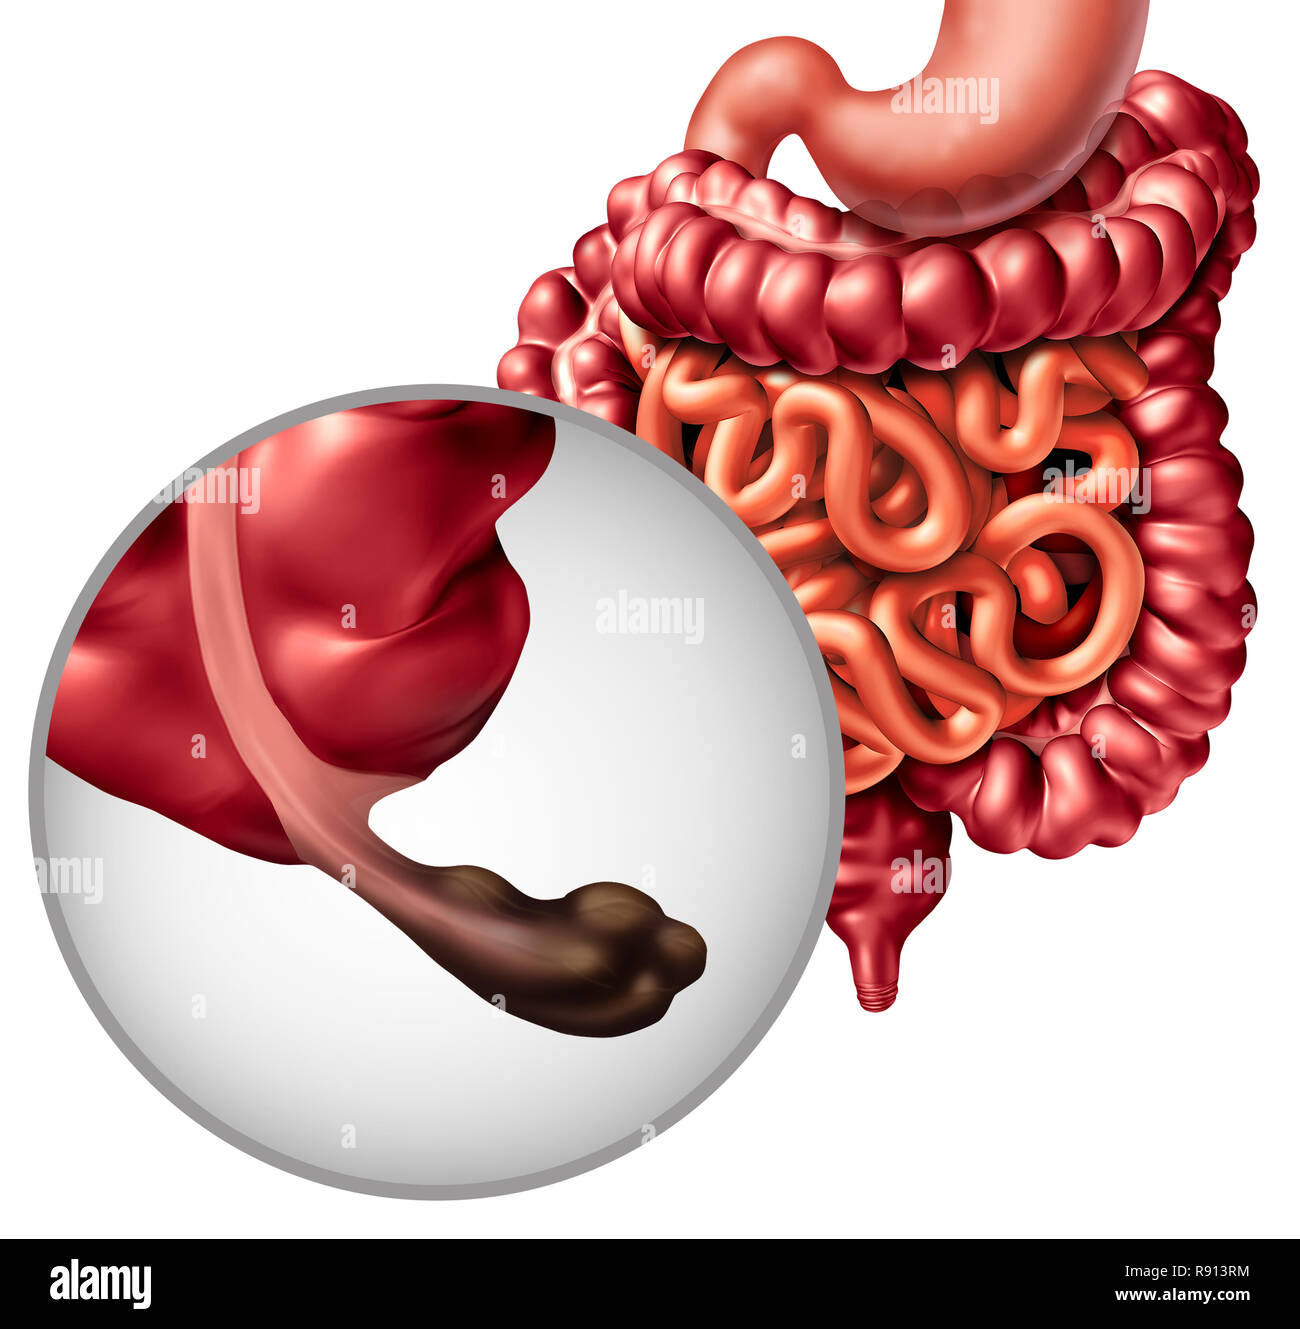 Appendix cancer and Intestine disease or gastrointestnal digestion with a malignant tumor symptoms and diagnosis problem as digestion discomfort. Stock Photo